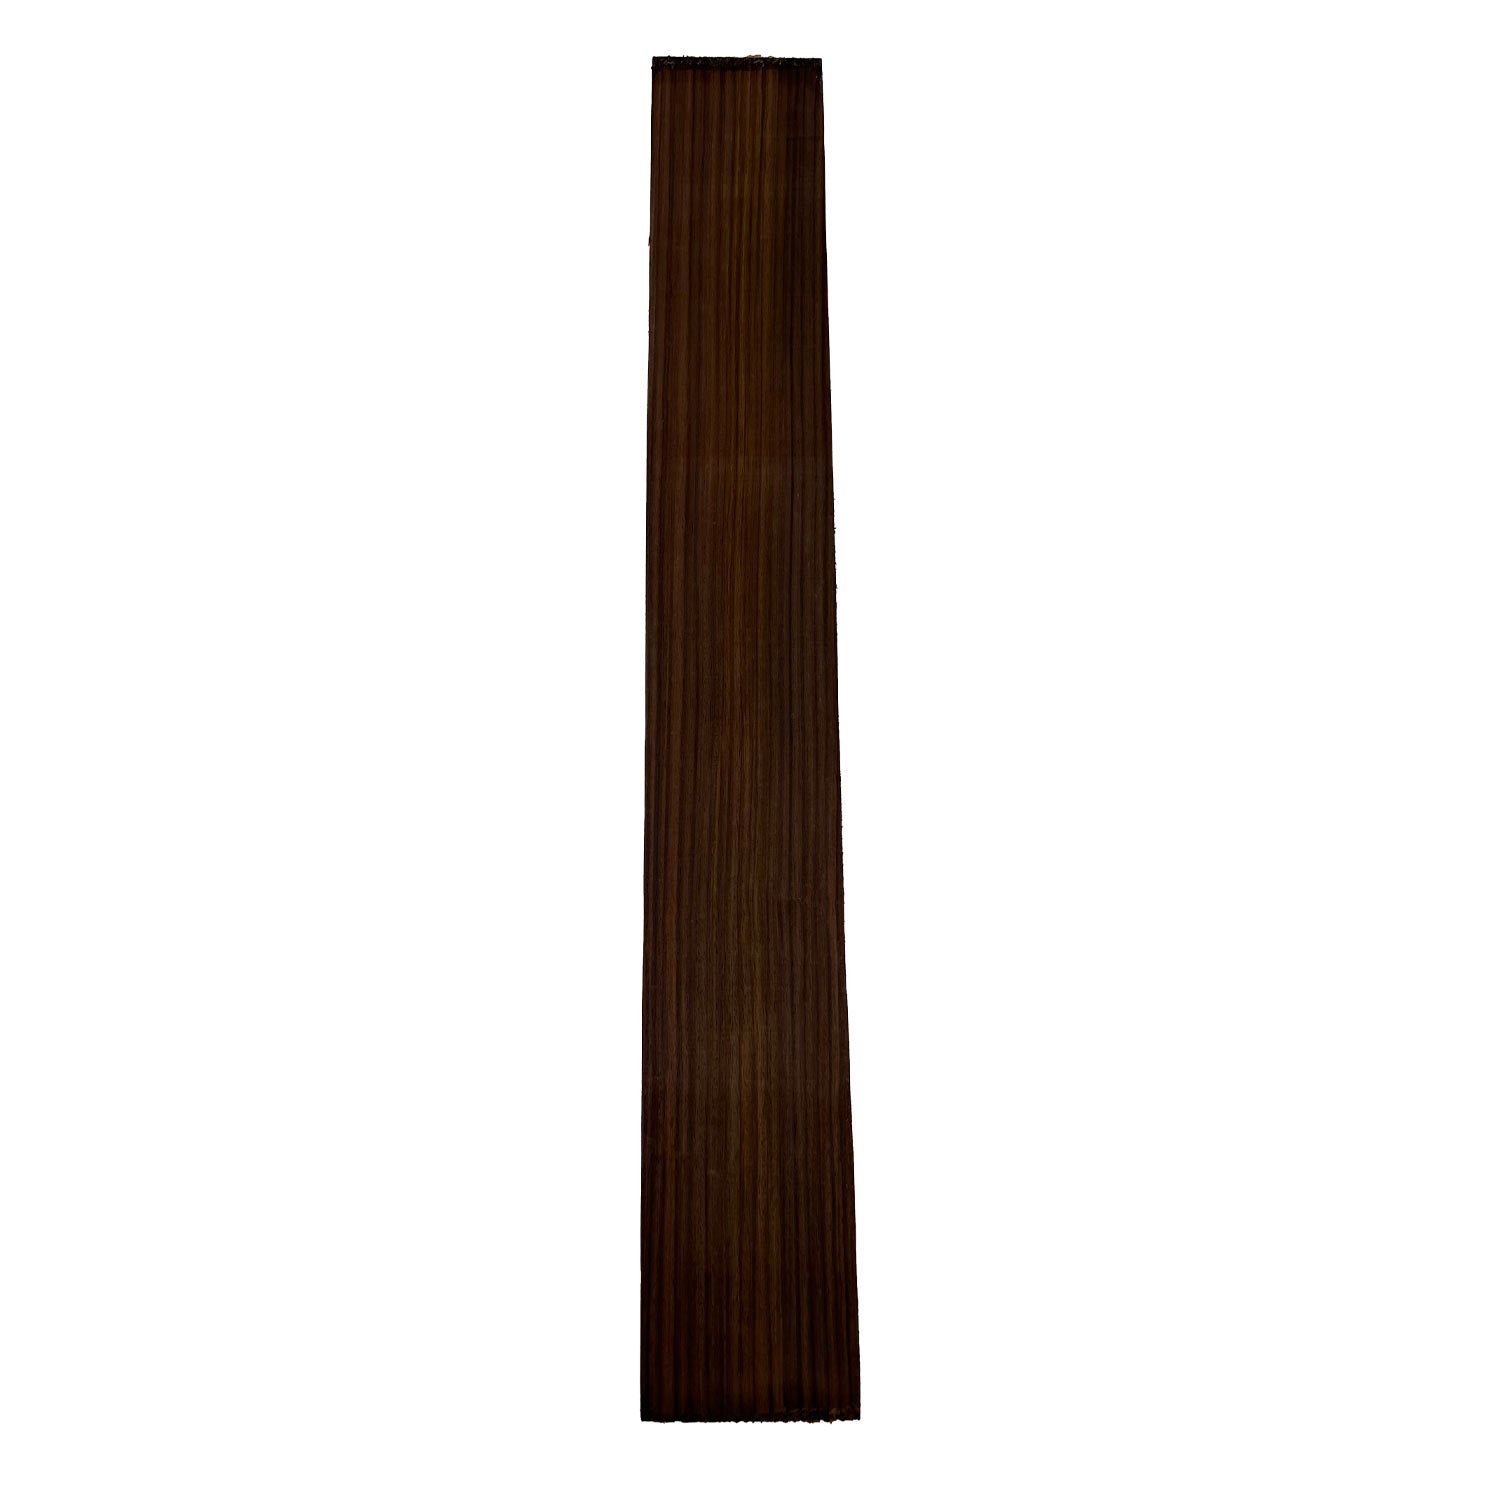 East Indian Rosewood Electrical/ Bass Wood Guitar Neck Blank 31x4